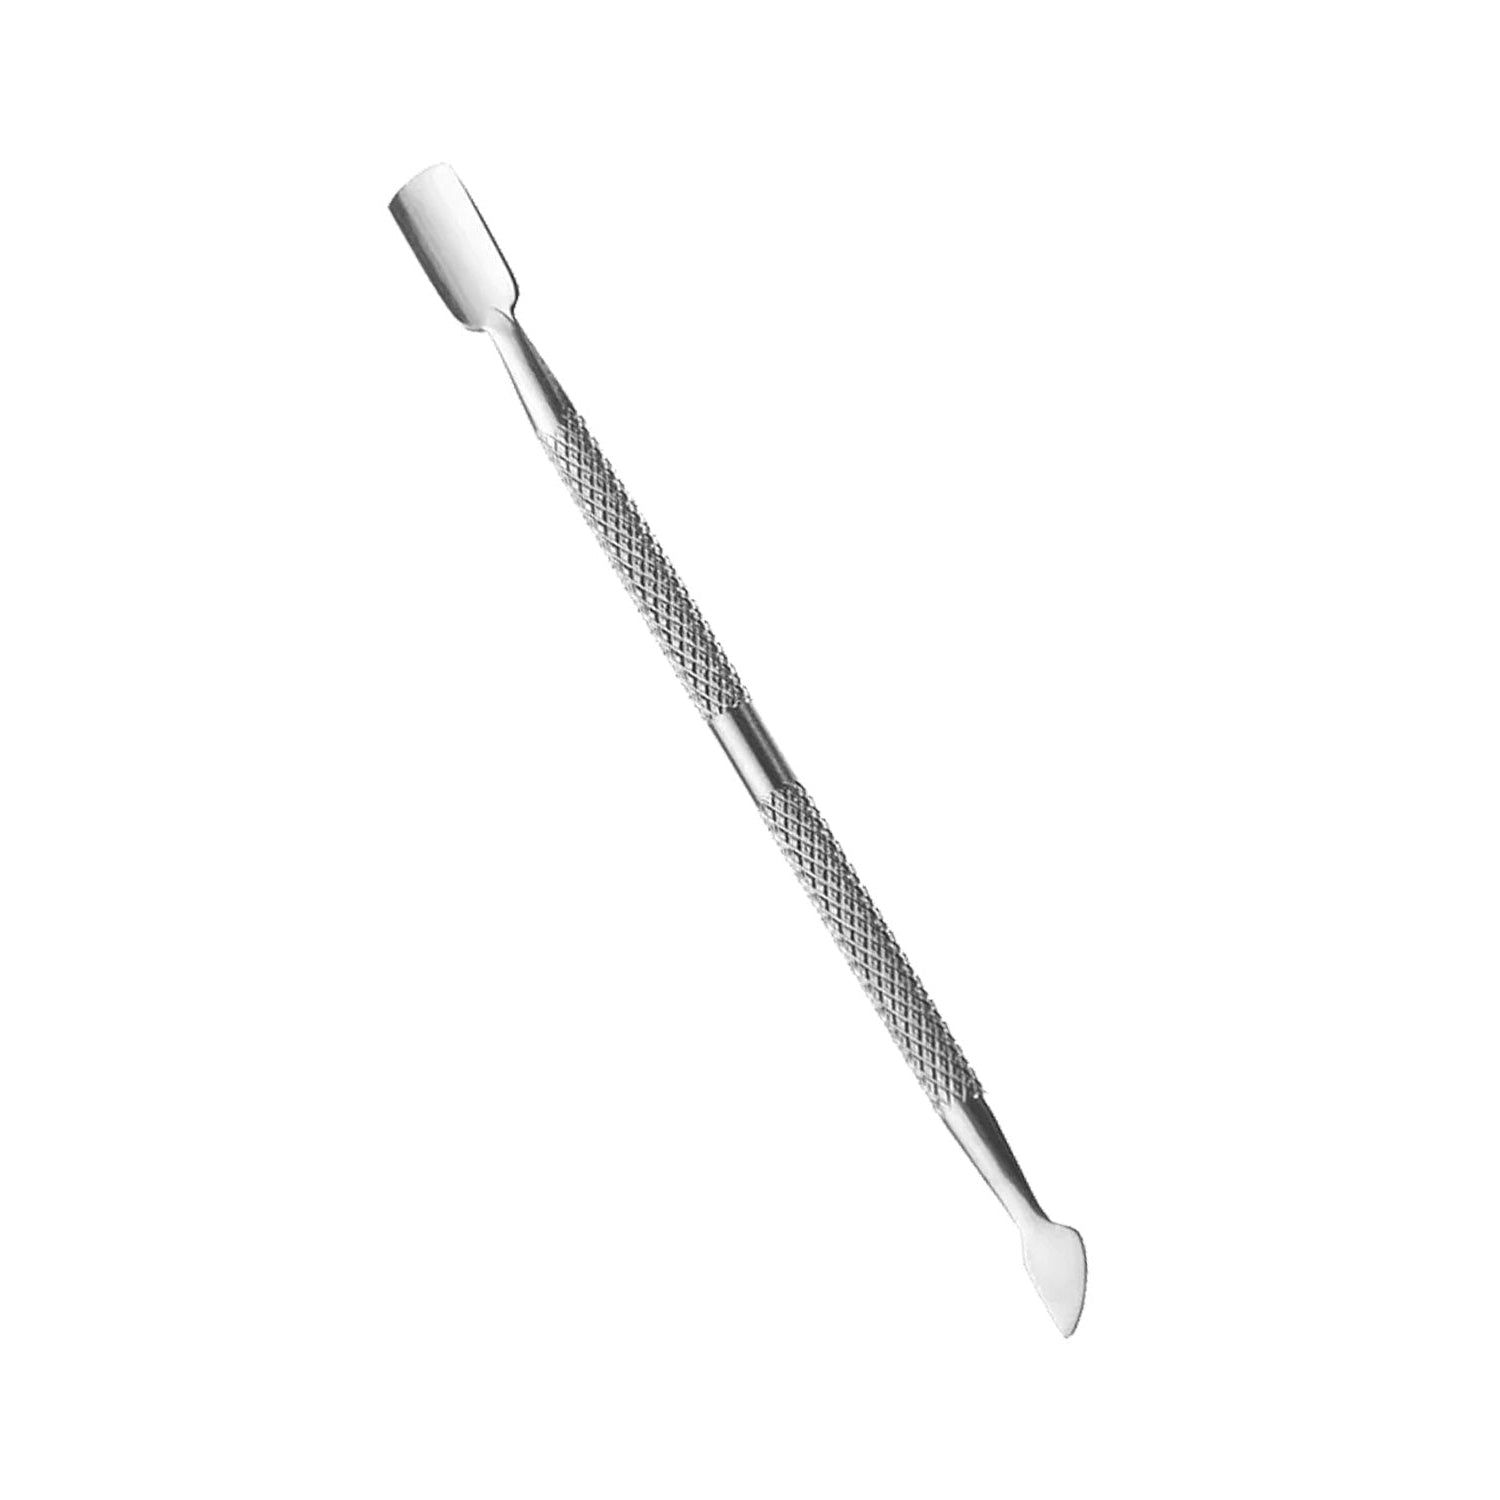 Elecsera Nail Pusher & Cuticle Remover - Price in India, Buy Elecsera Nail  Pusher & Cuticle Remover Online In India, Reviews, Ratings & Features |  Flipkart.com